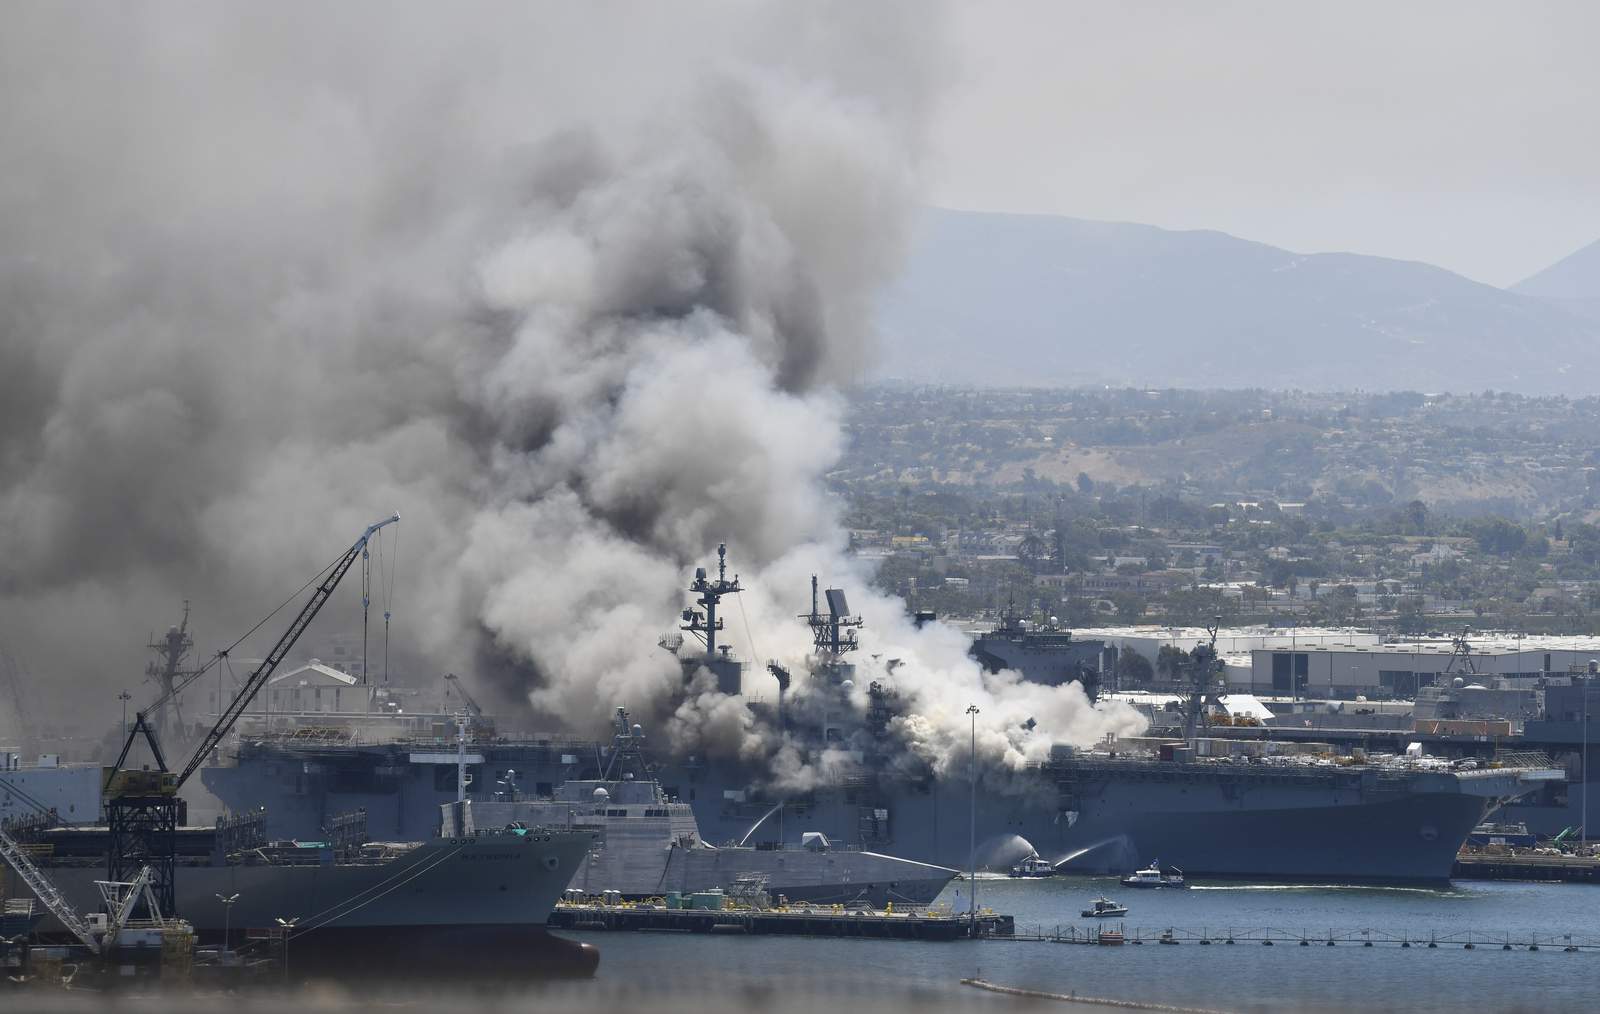 11 injured in fire aboard ship at Naval Base San Diego